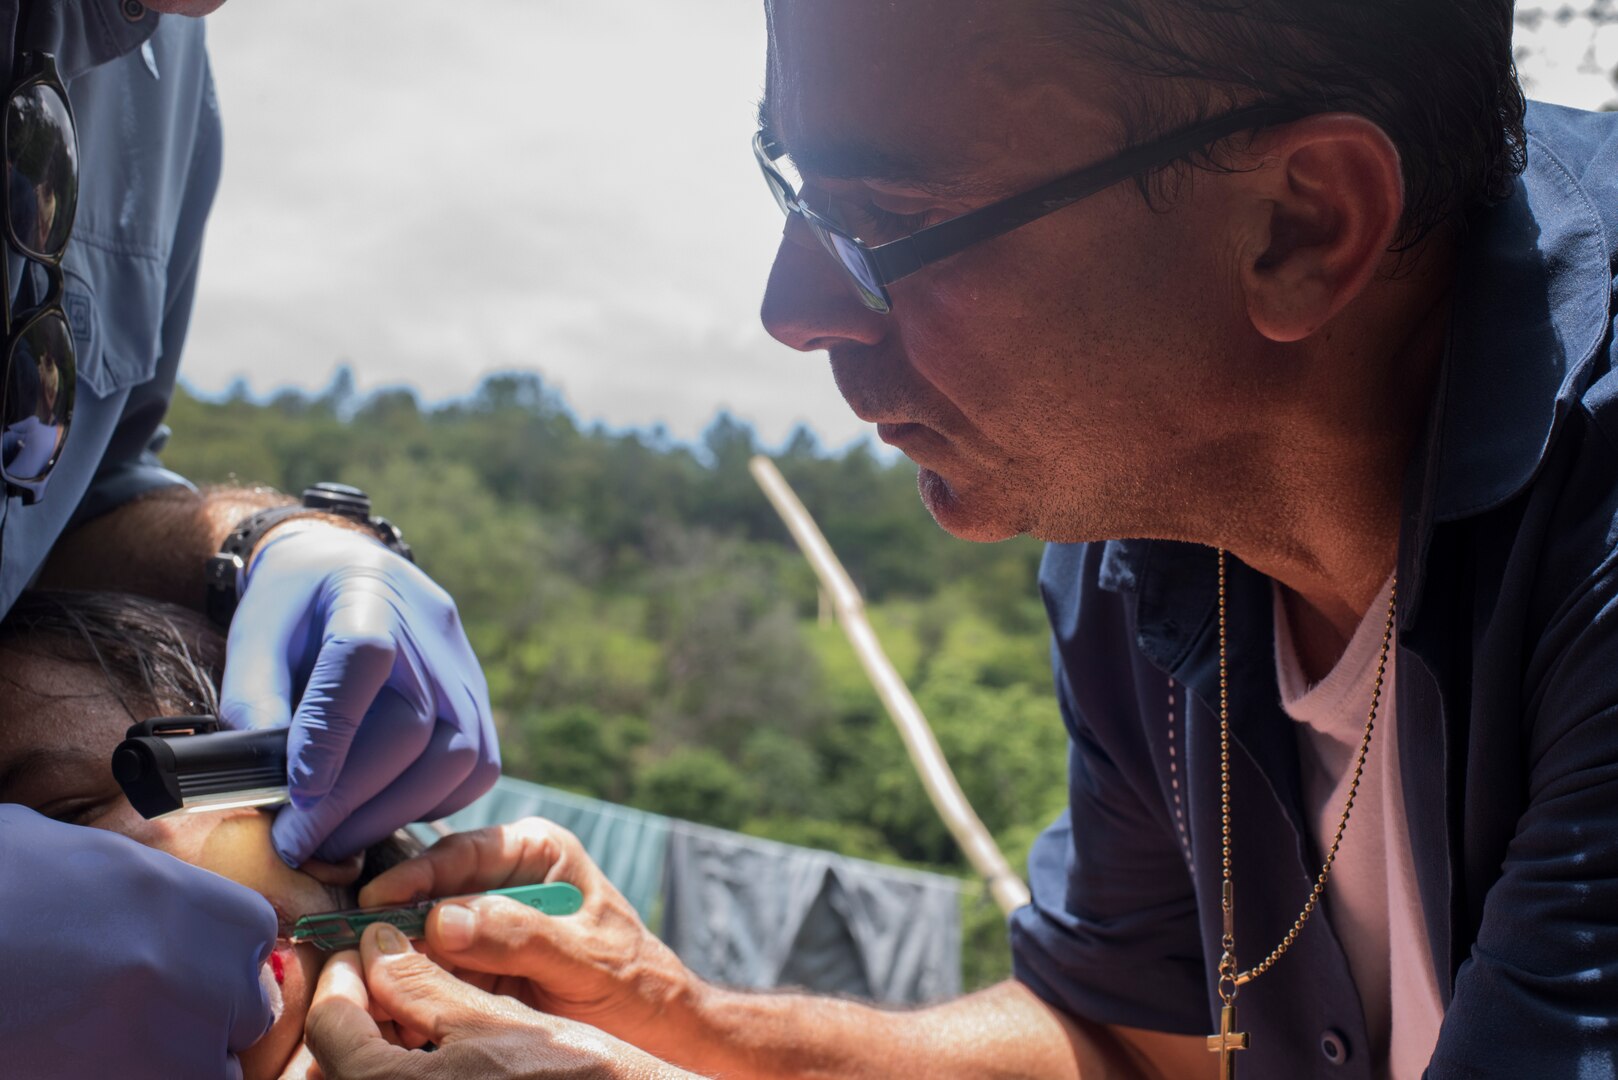 U.S. Army Lt. Col. Manuel Pouparina, Joint Task Force – Bravo Medical Element physician, takes a tissue sample from a Honduran woman whom contracted Leishmaniasis, during an investigation, July 9, 2019, at La Libertad, Honduras. Members of JTF-B were asked by the Honduran Ministry of Health to conduct an investigation into the cause of Leishmaniasis and provide any recommendations that may stop infection. Leishmaniasis is a parasitic disease that is caused by infection with leishmania parasites, which are spread through the bite of sand flies. (U.S. Air Force photo by Staff Sgt. Eric Summers Jr.)